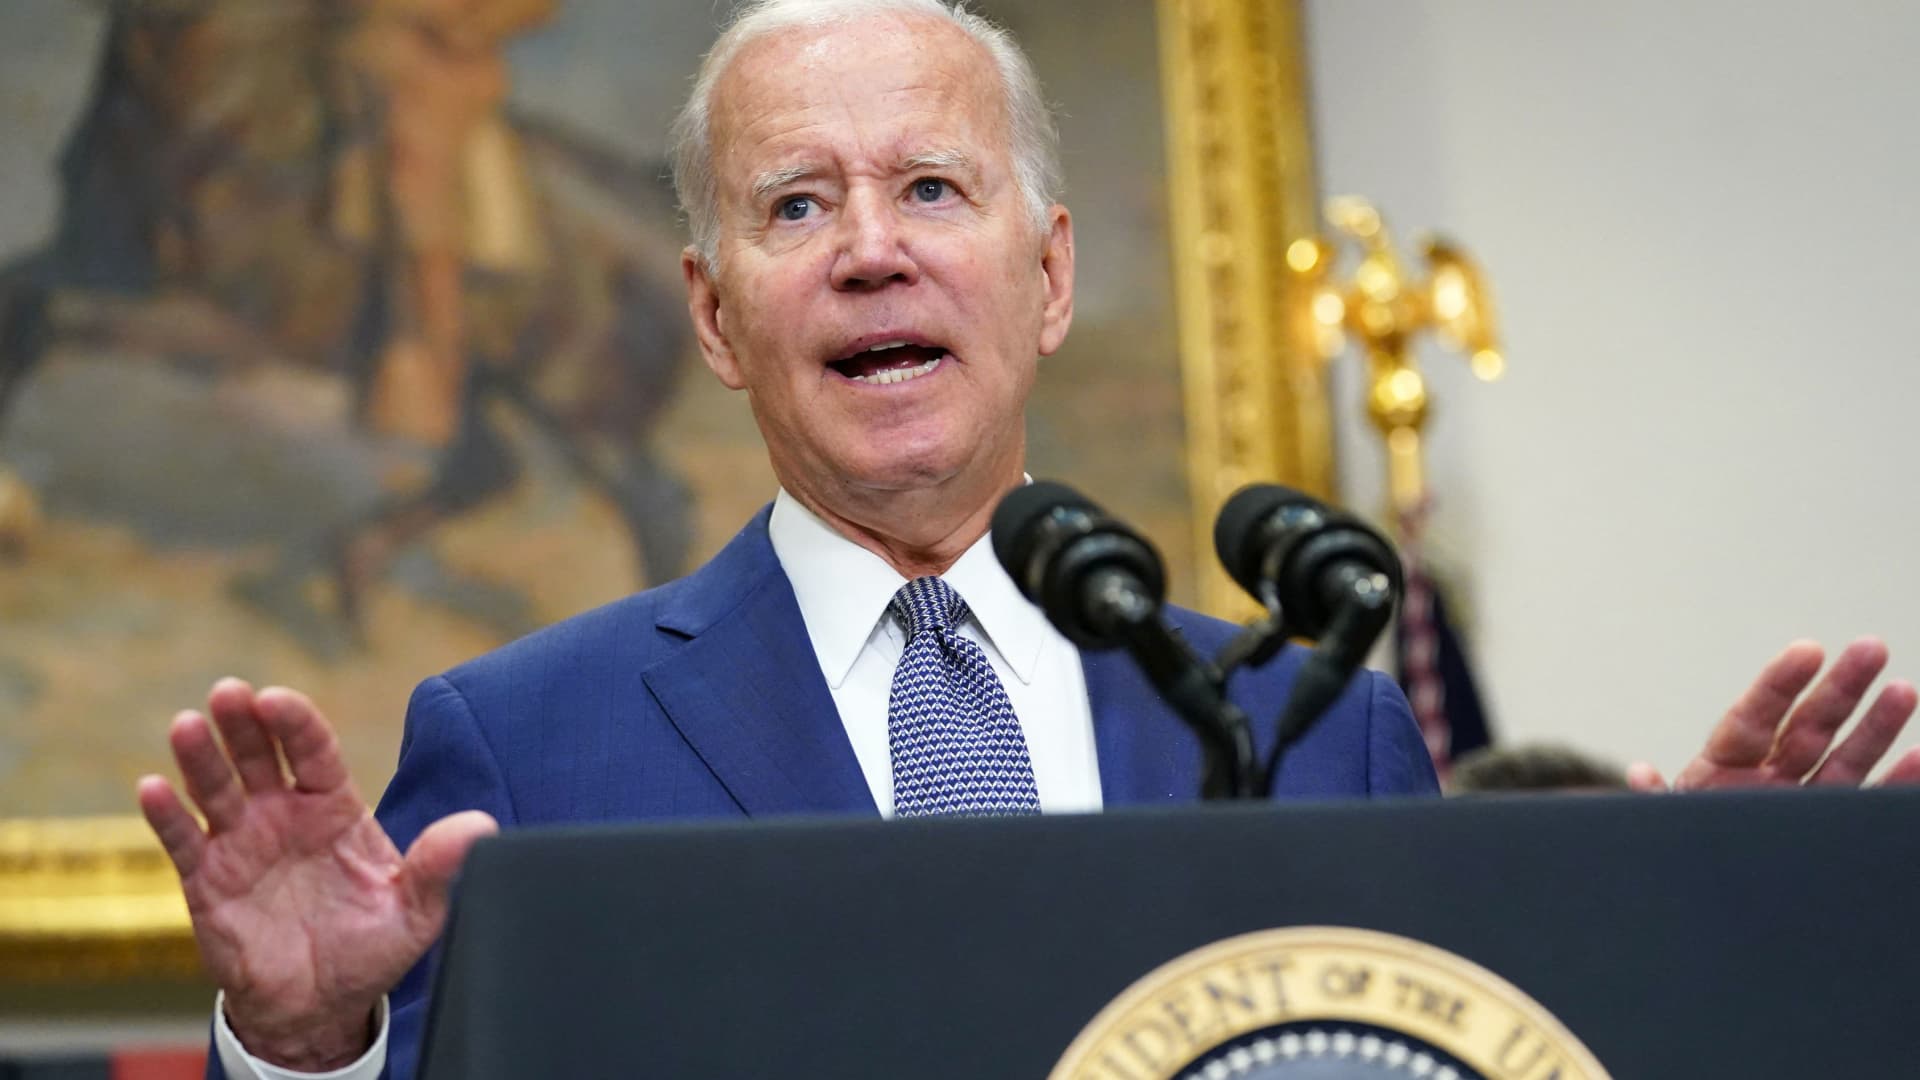 Biden says Supreme Court is ‘out of control,’ orders HHS to protect abortion access